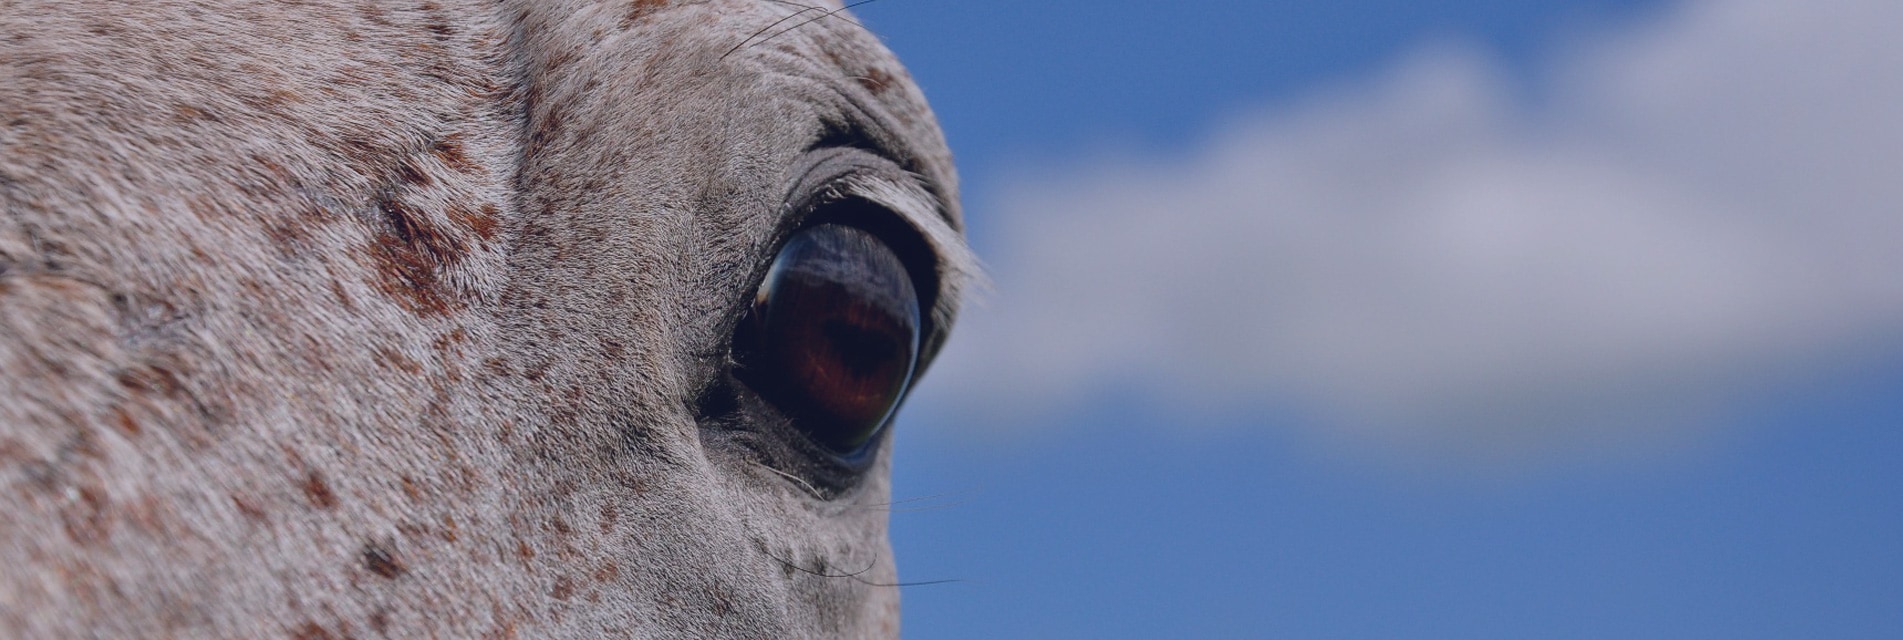 Equine ophthalmology referral service for the North of England